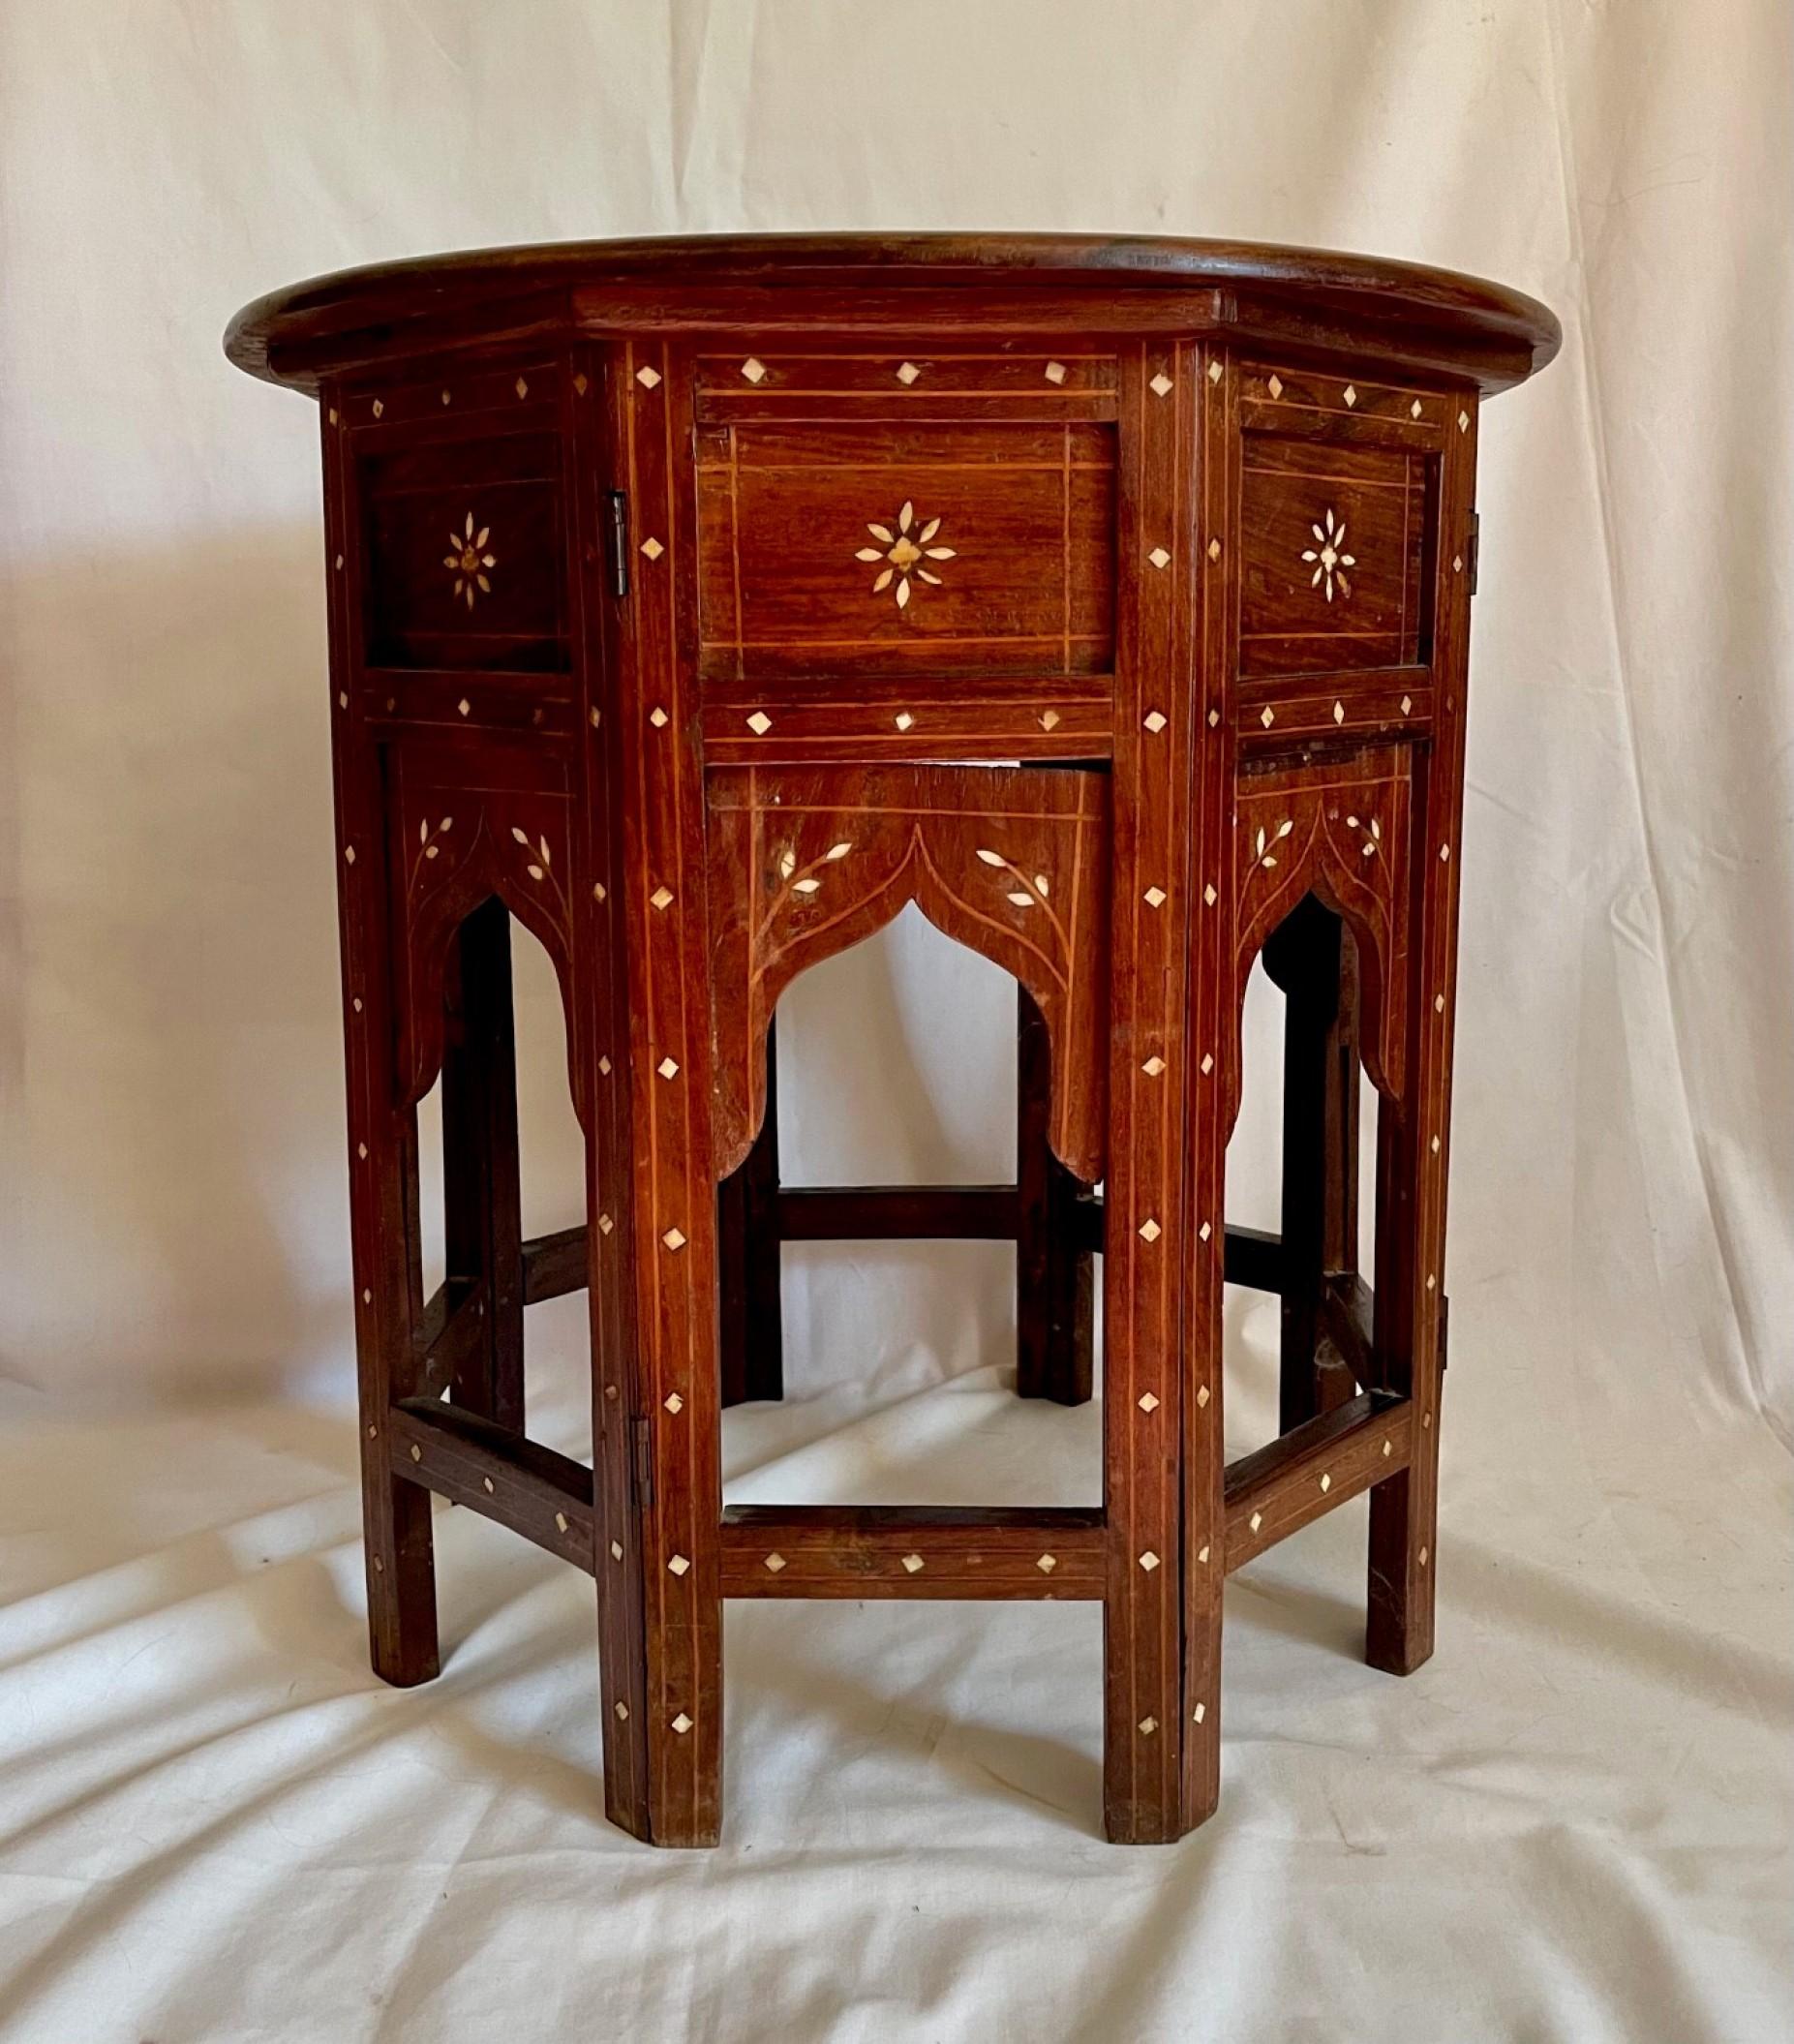 Antique Hoshiarpur inlaid octagonal folding side table, circa 1890.

Late 19th century octagonal Hoshiarpur table with intricate bone inlay. The top has an elaborate image of a Peacock inlaid with bone and is surrounded by bone inlay floral and